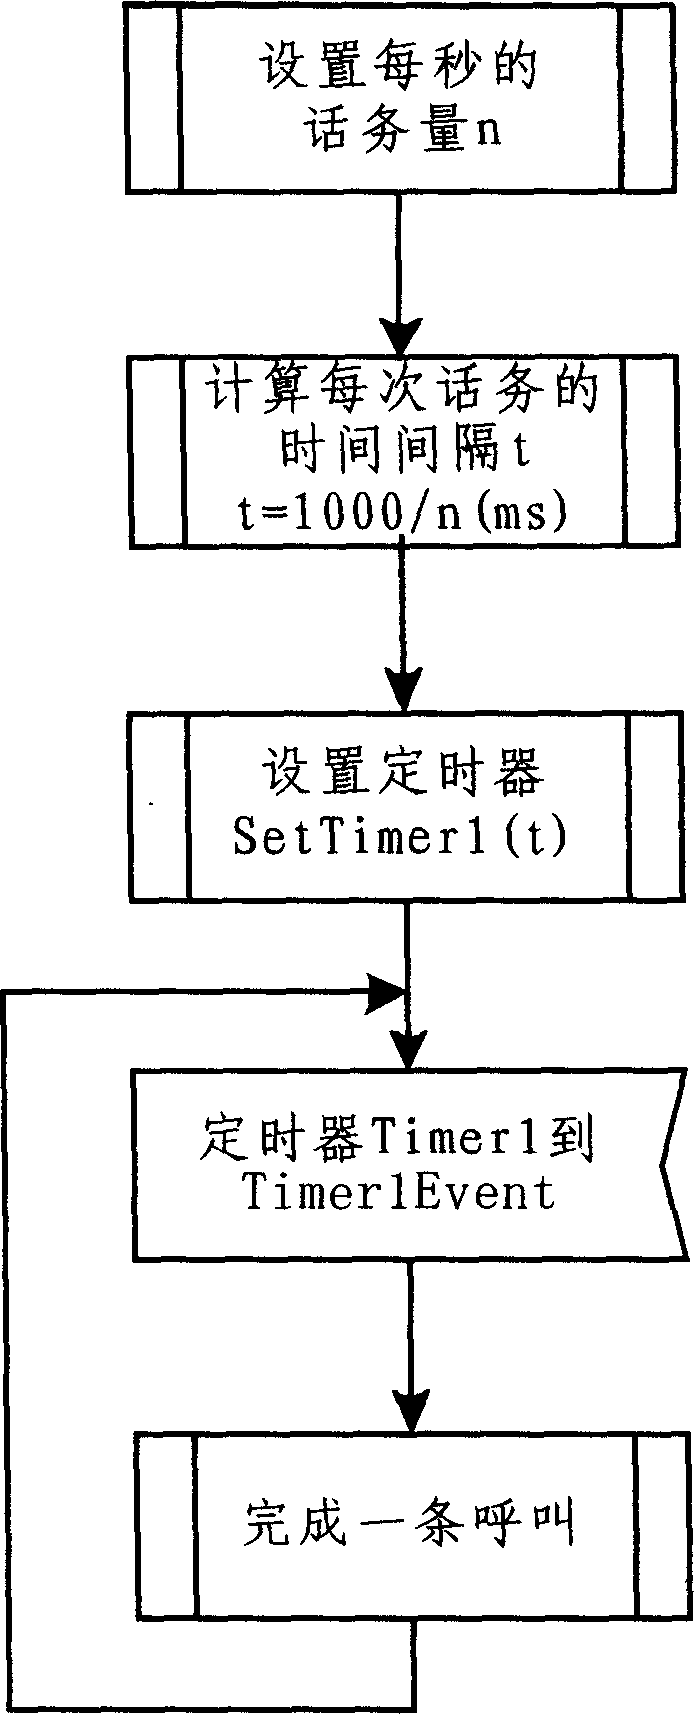 Method for controlling traffic in simulation of large traffic test